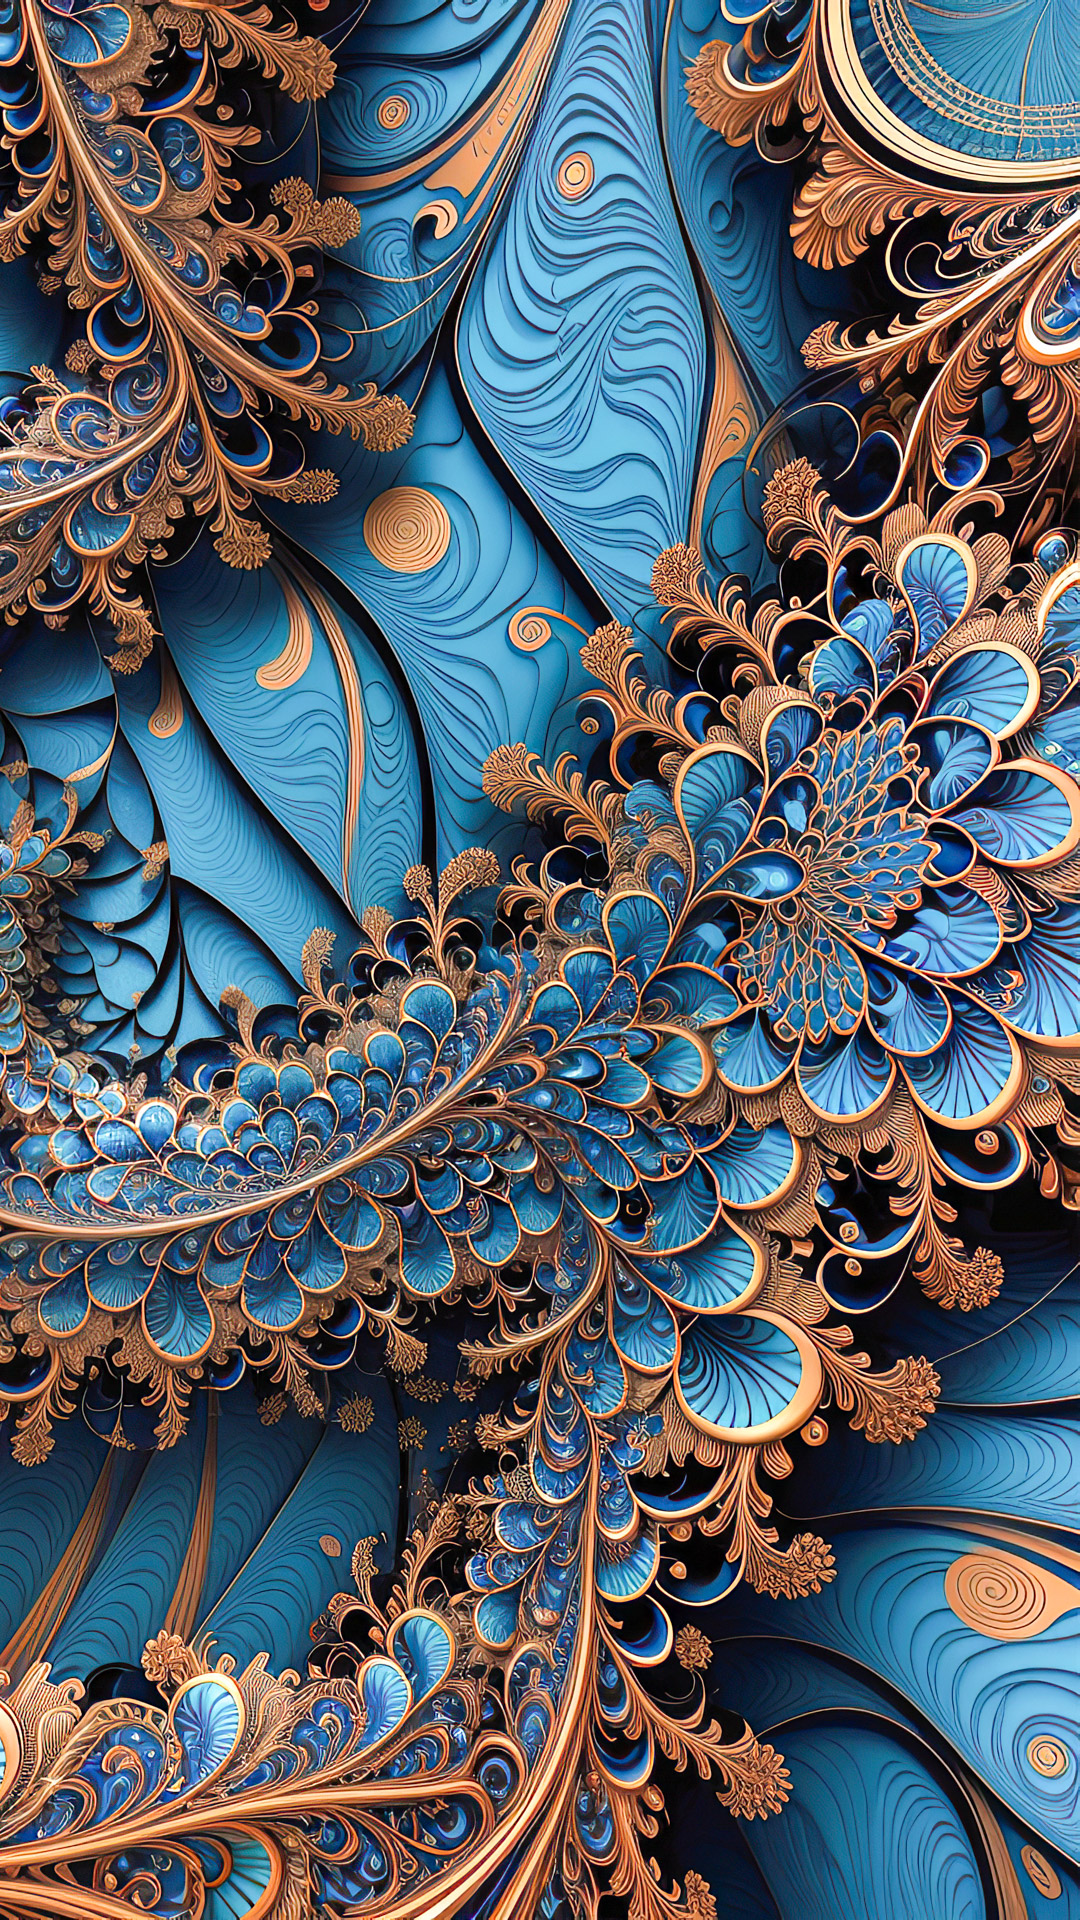 Delight in the intricate beauty of our abstract phone wallpaper HD, featuring mesmerizing fractal patterns in an intertwining visual spectacle.